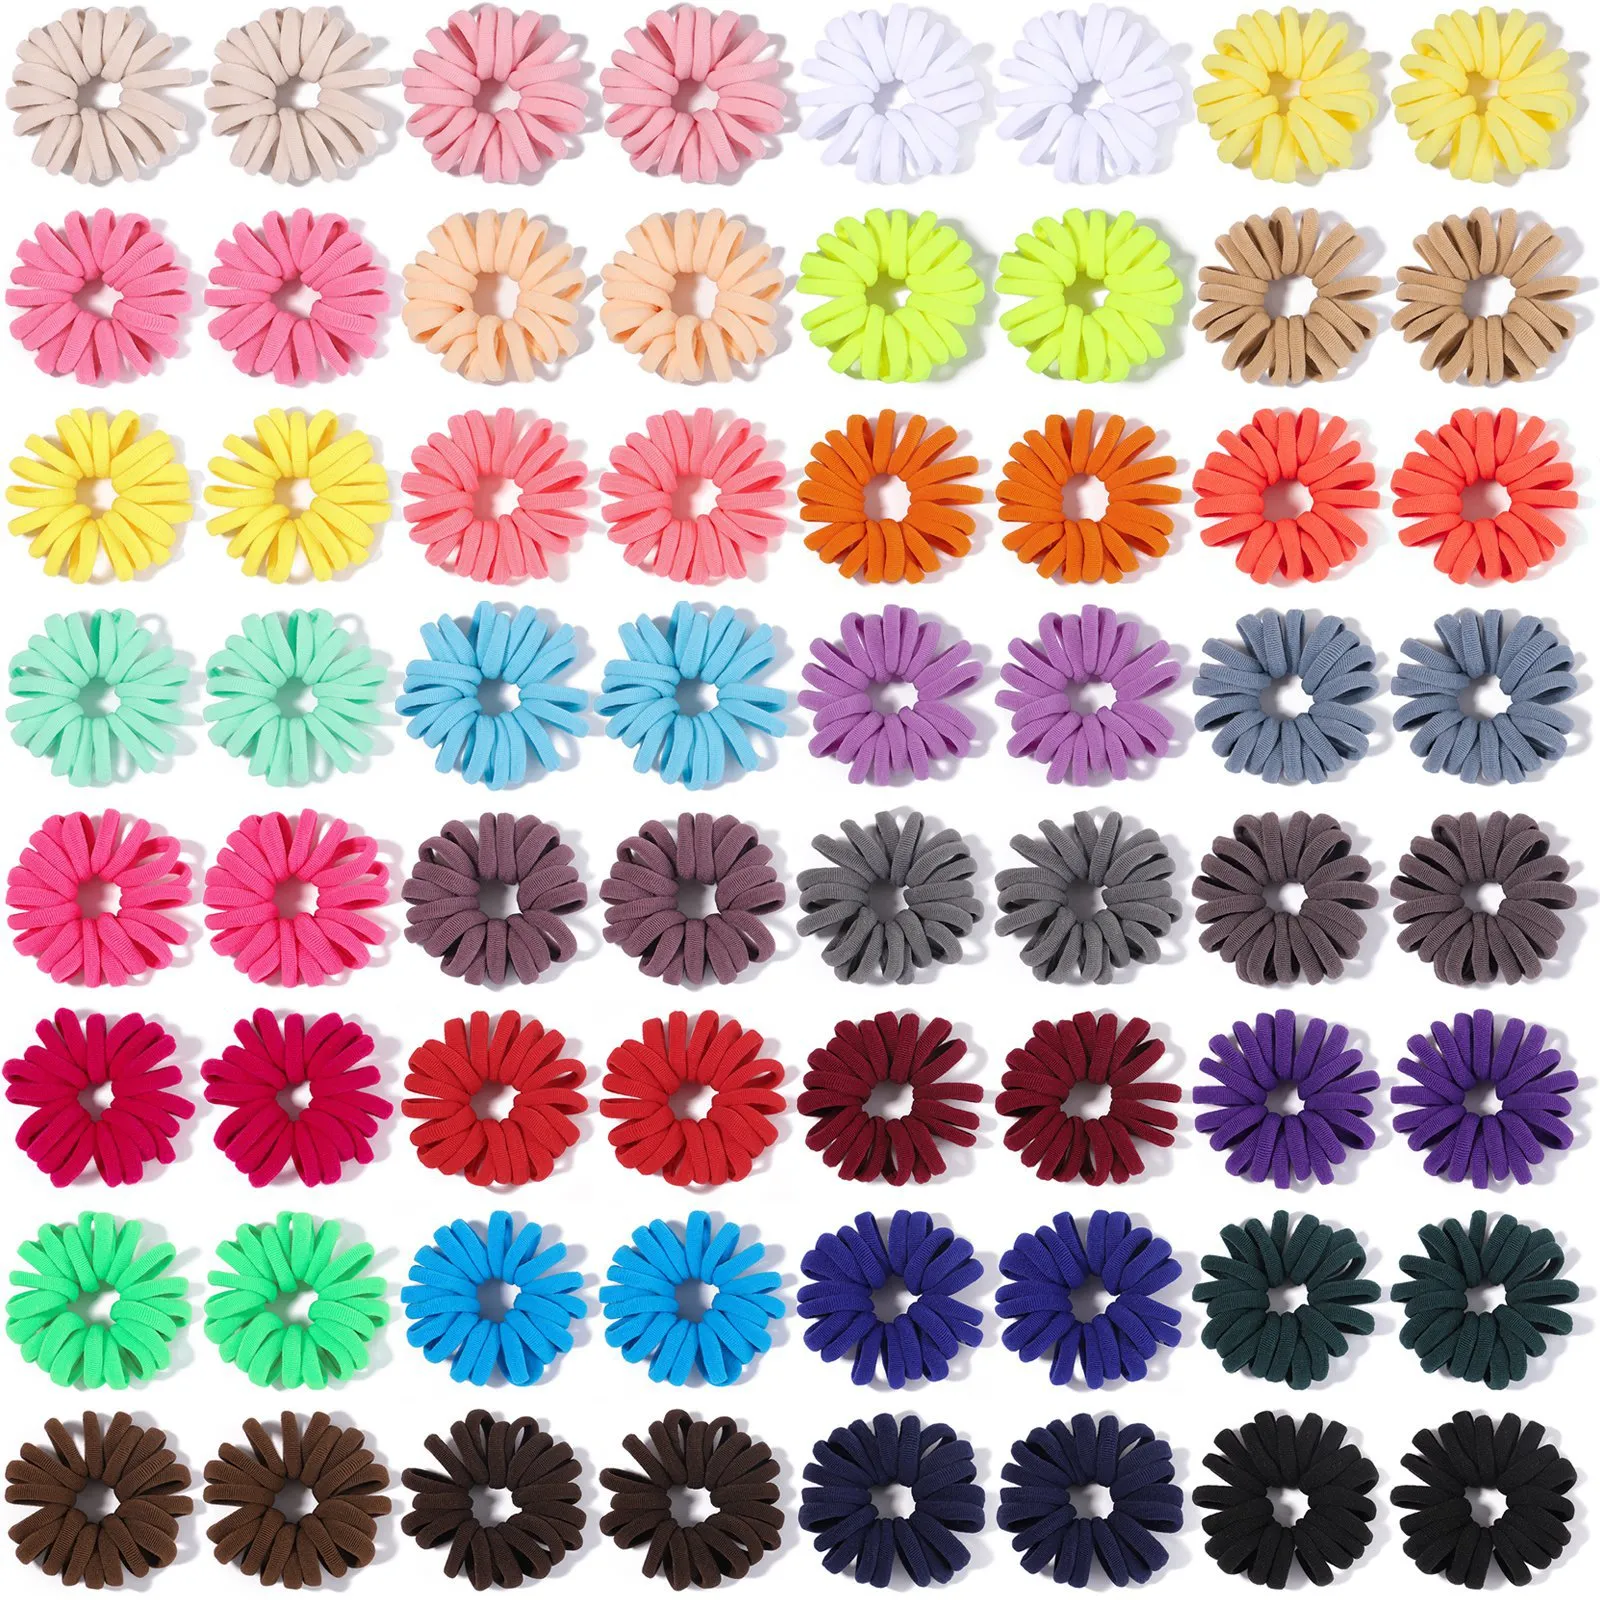 20pcs/set Colorful Basic Nylon Ealstic Hair Band For Girls Ponytail Hold Scrunchie Rubber Band Kid Fashion Hair Accessories 2725